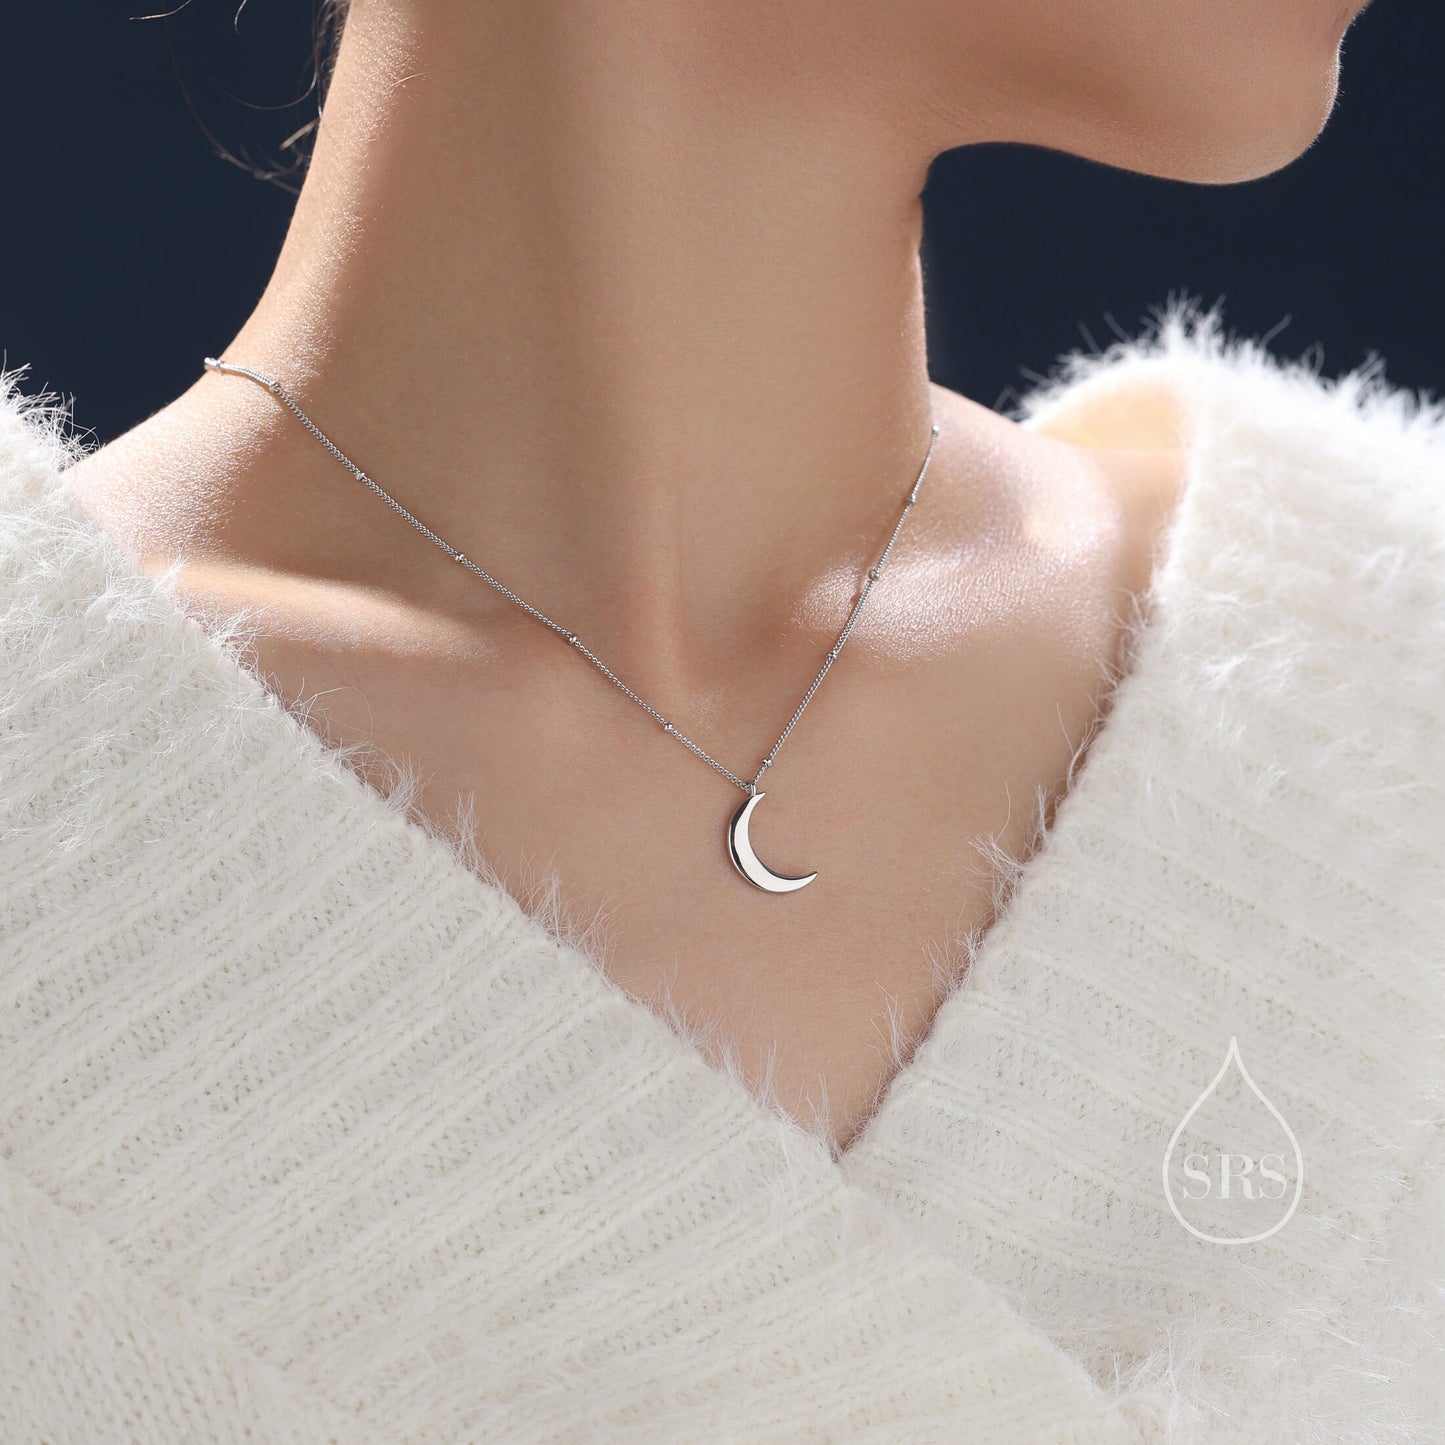 Crescent Moon Pendant Necklace in Sterling Silver with a Satellite Chain - Moon Necklace - Gold or Silver -  Whimsical and Pretty Jewellery